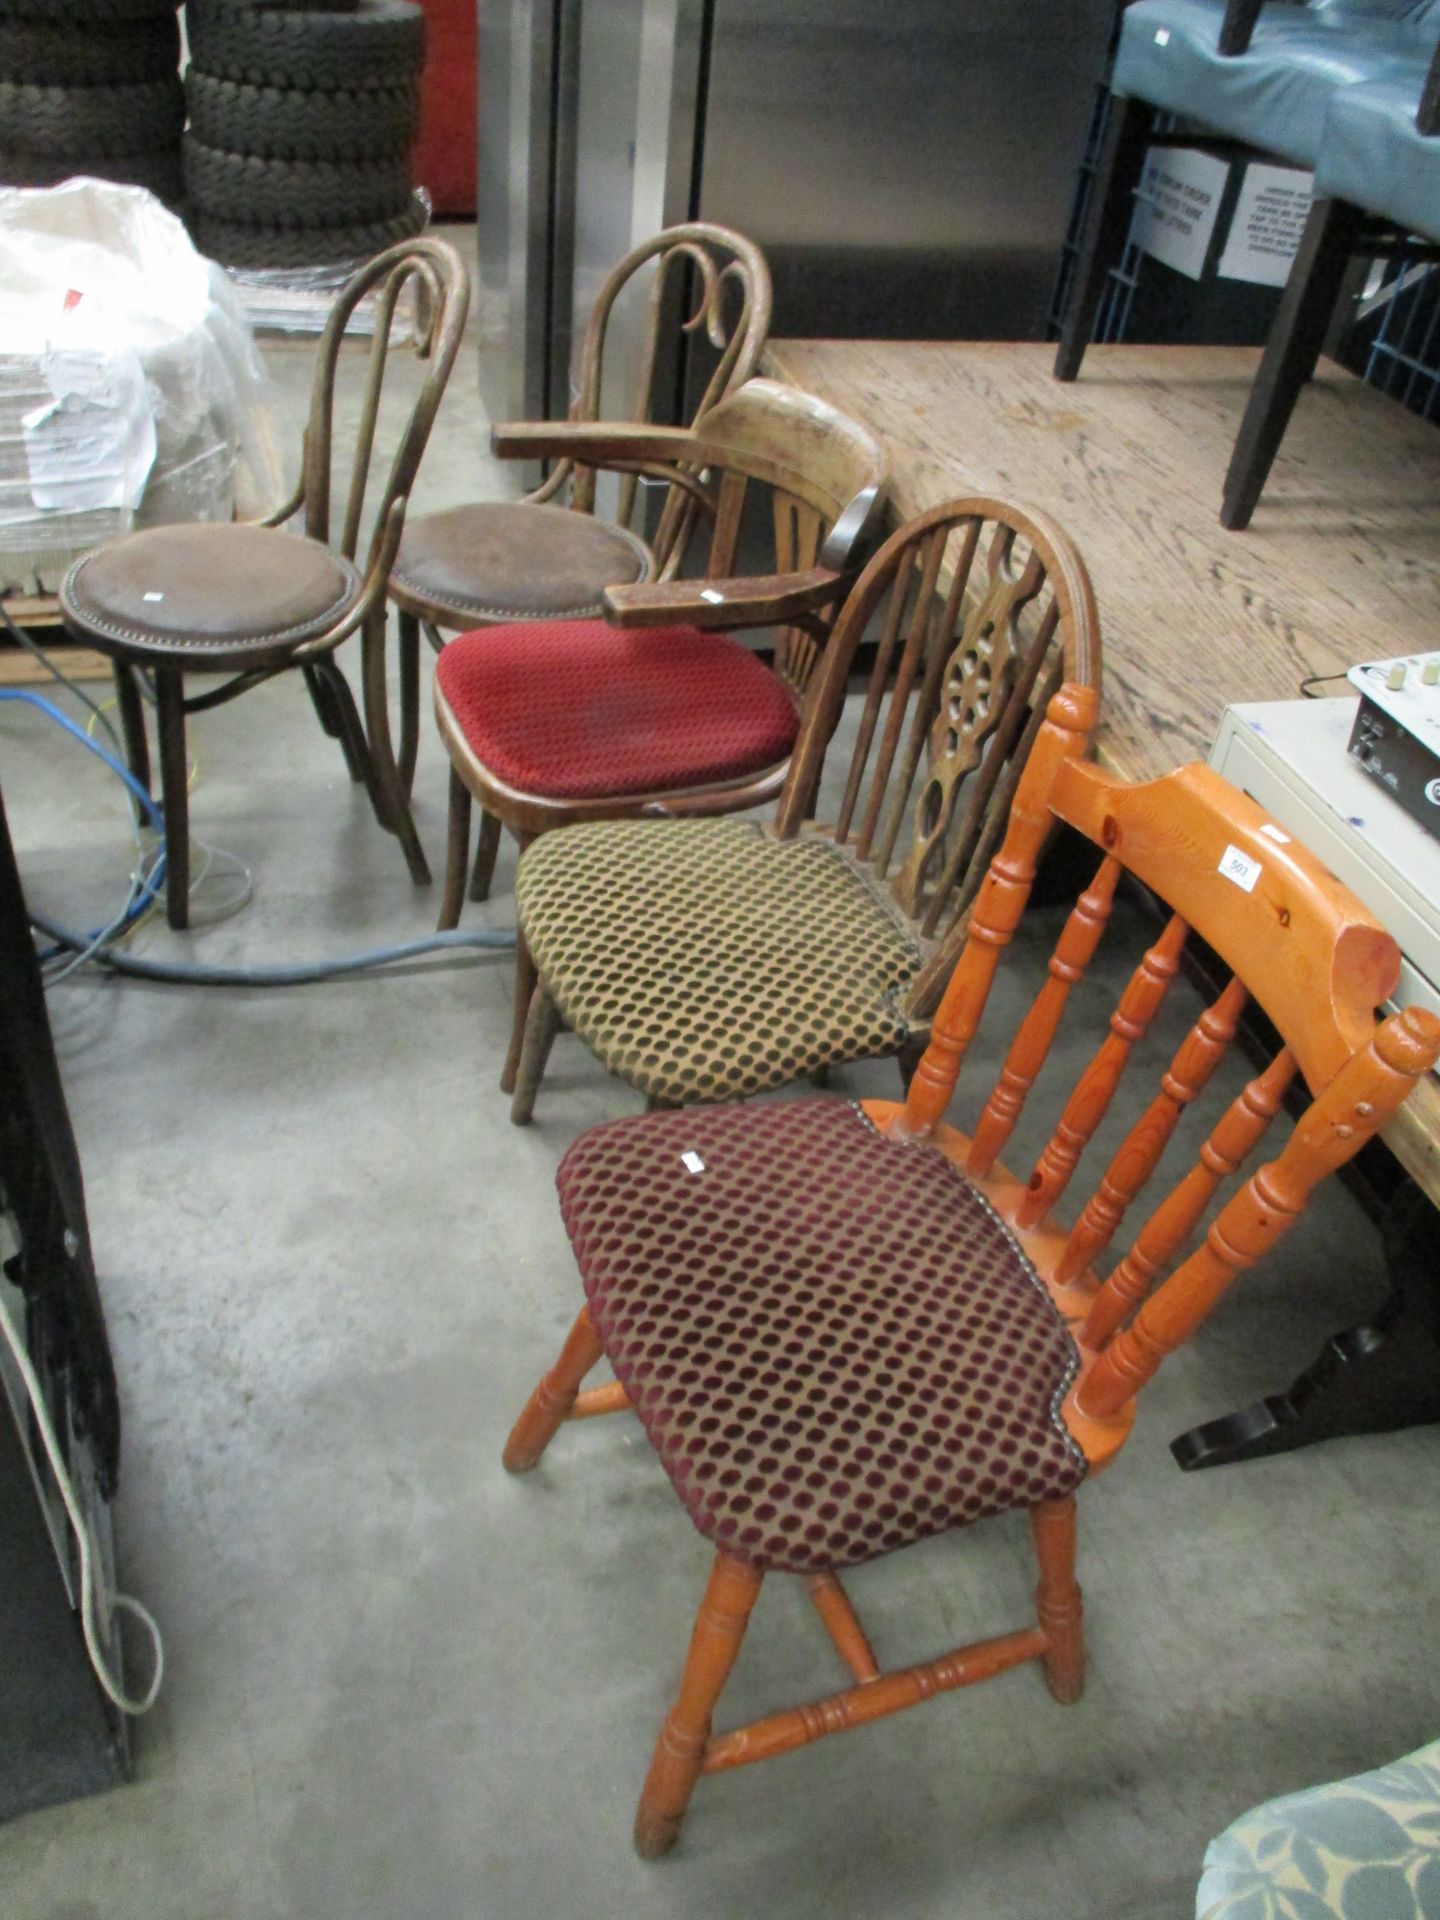 5 x assorted bar chairs including 2 x bentwood style chairs